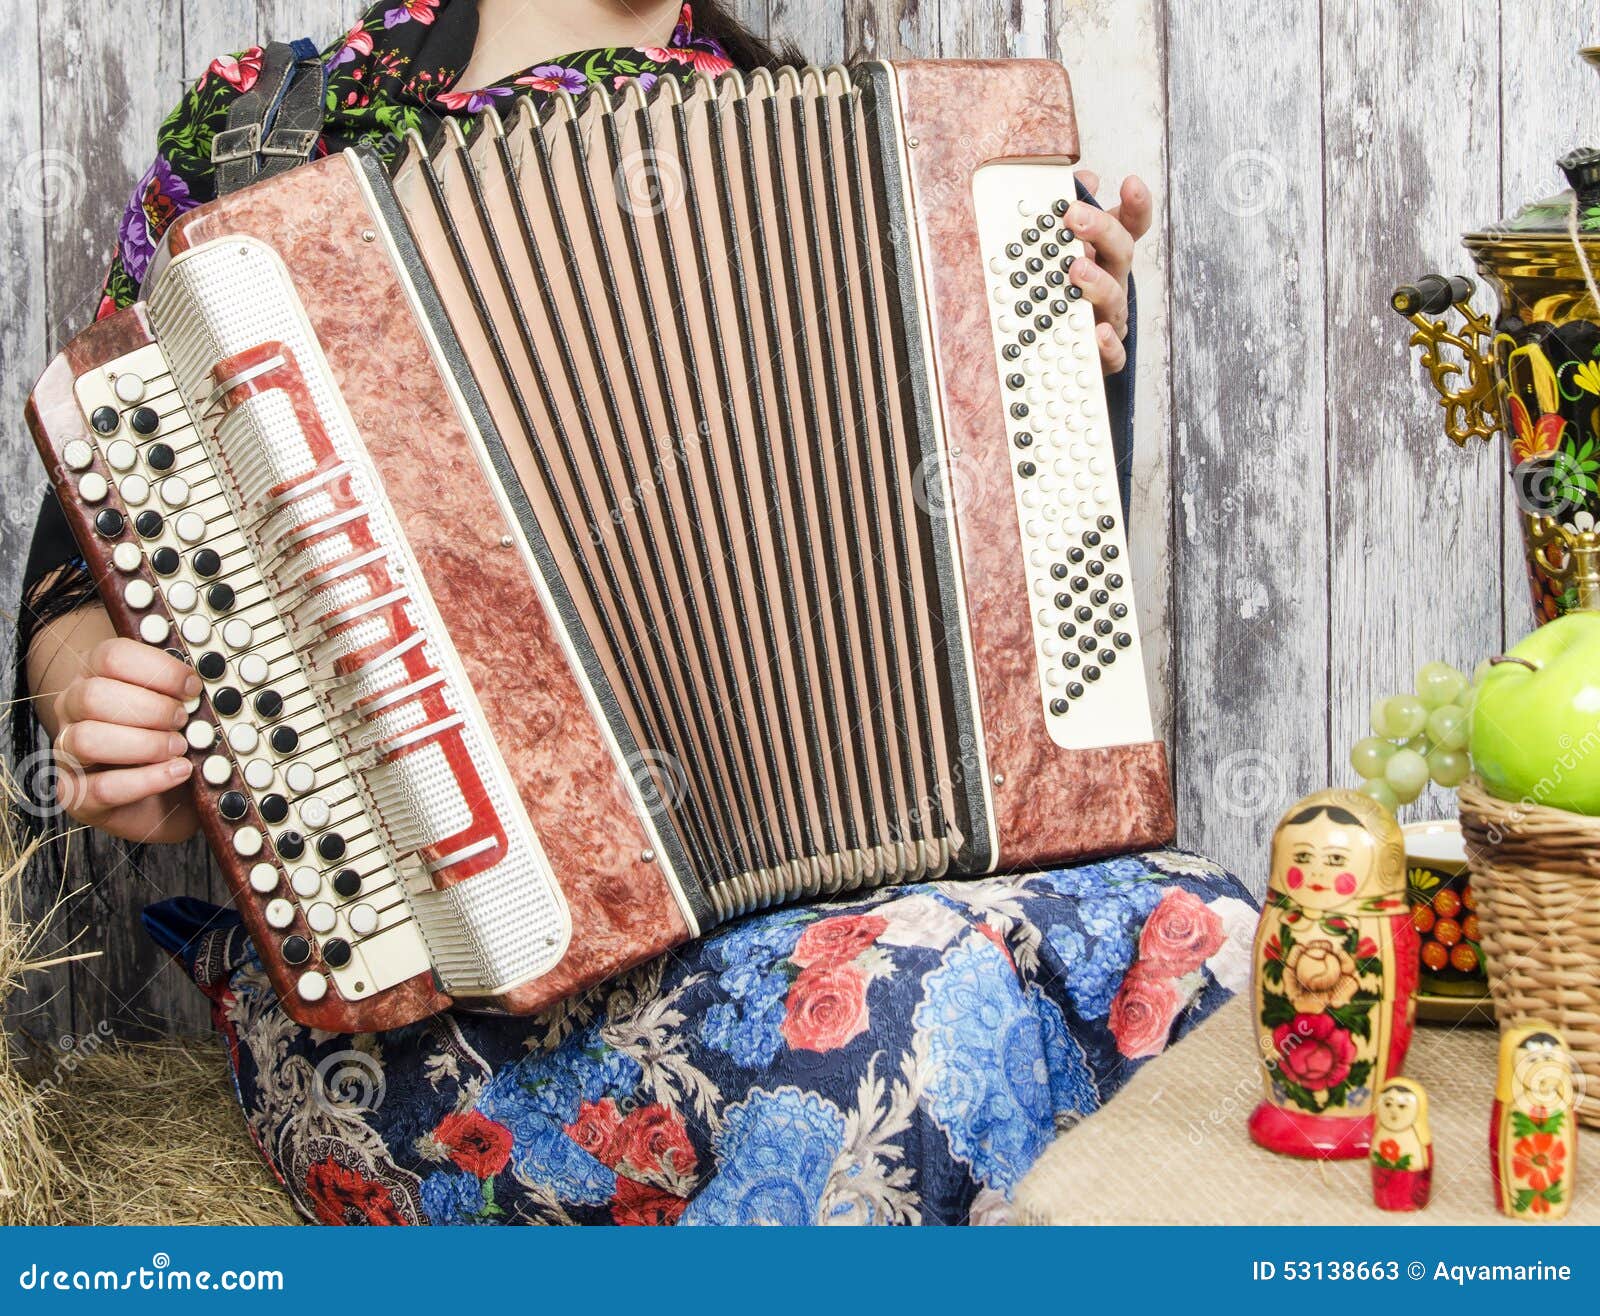 Female Hand Holding An Accordion Stock Image - Image of melody